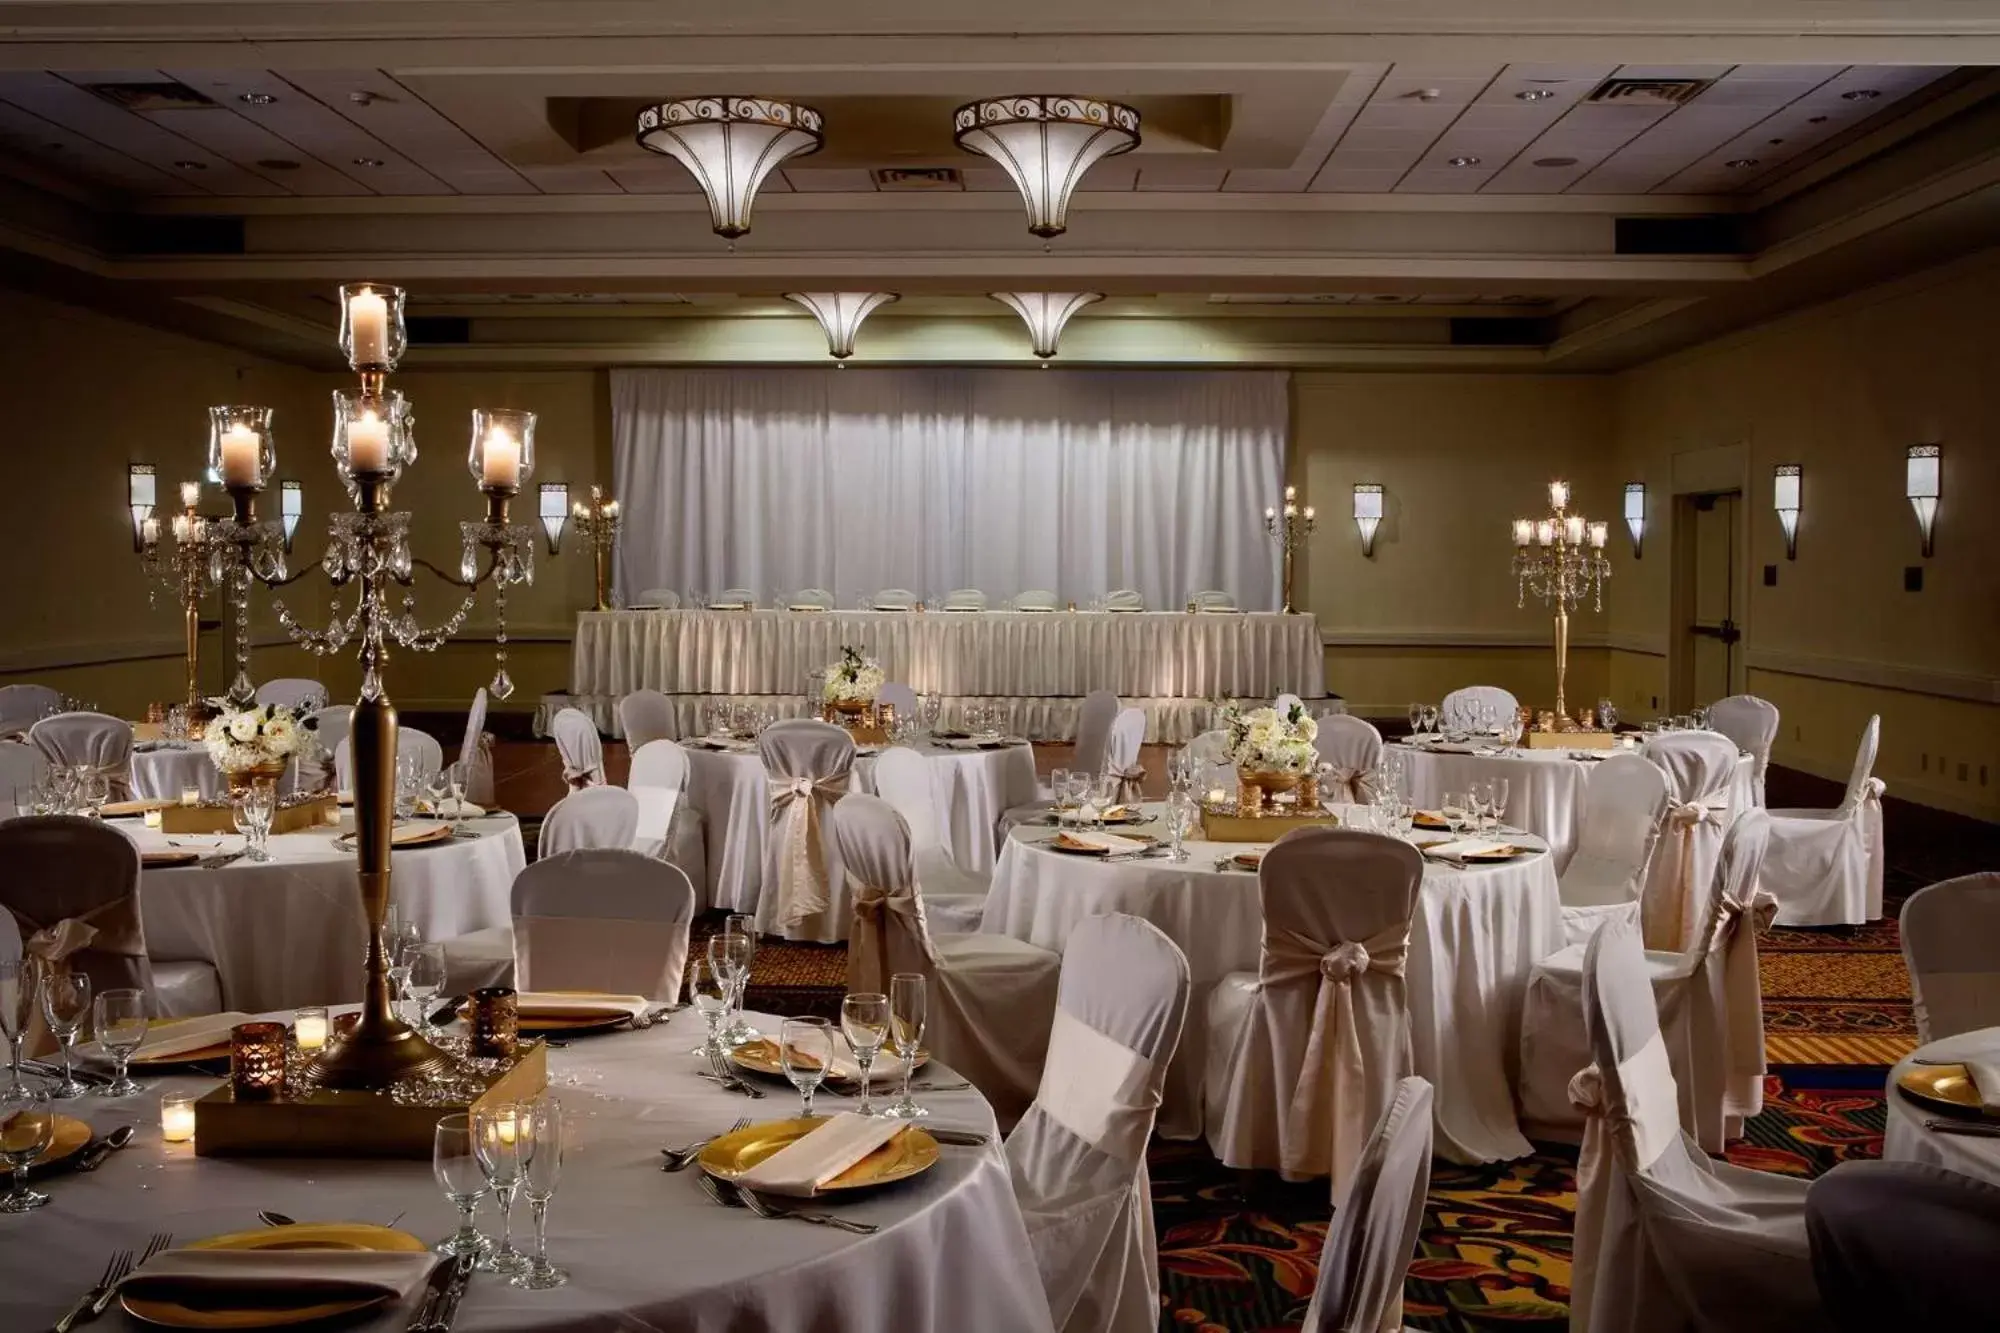 Meeting/conference room, Banquet Facilities in DoubleTree by Hilton Hotel South Bend